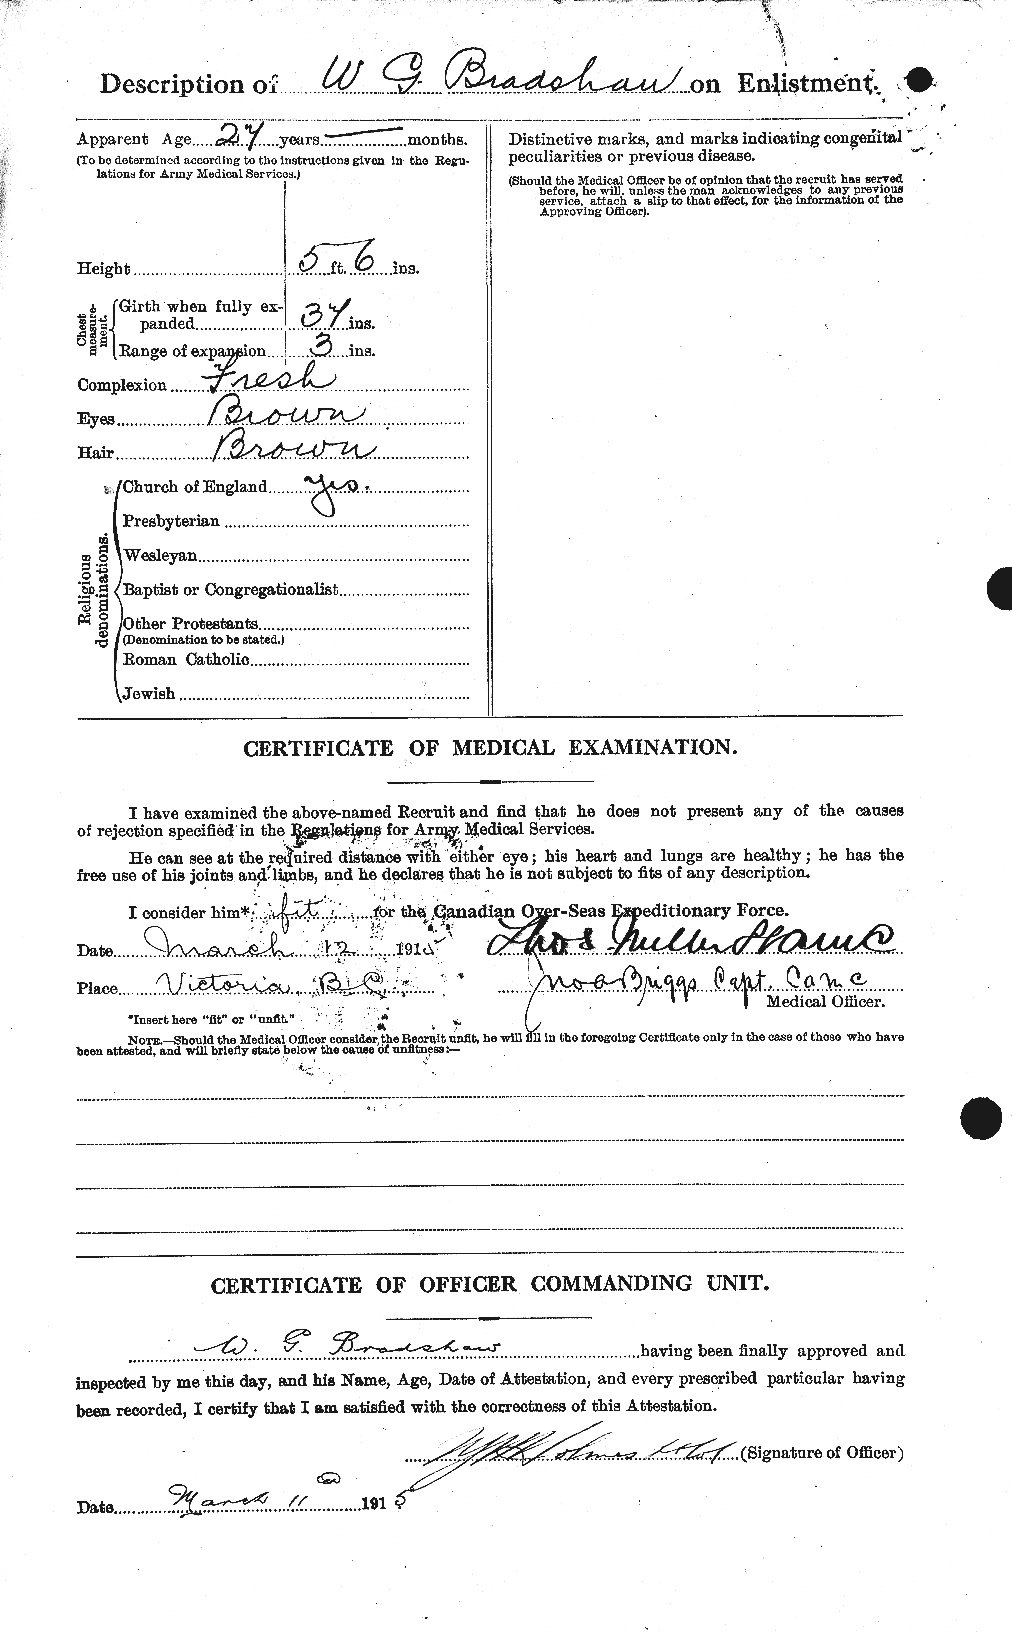 Personnel Records of the First World War - CEF 256697b